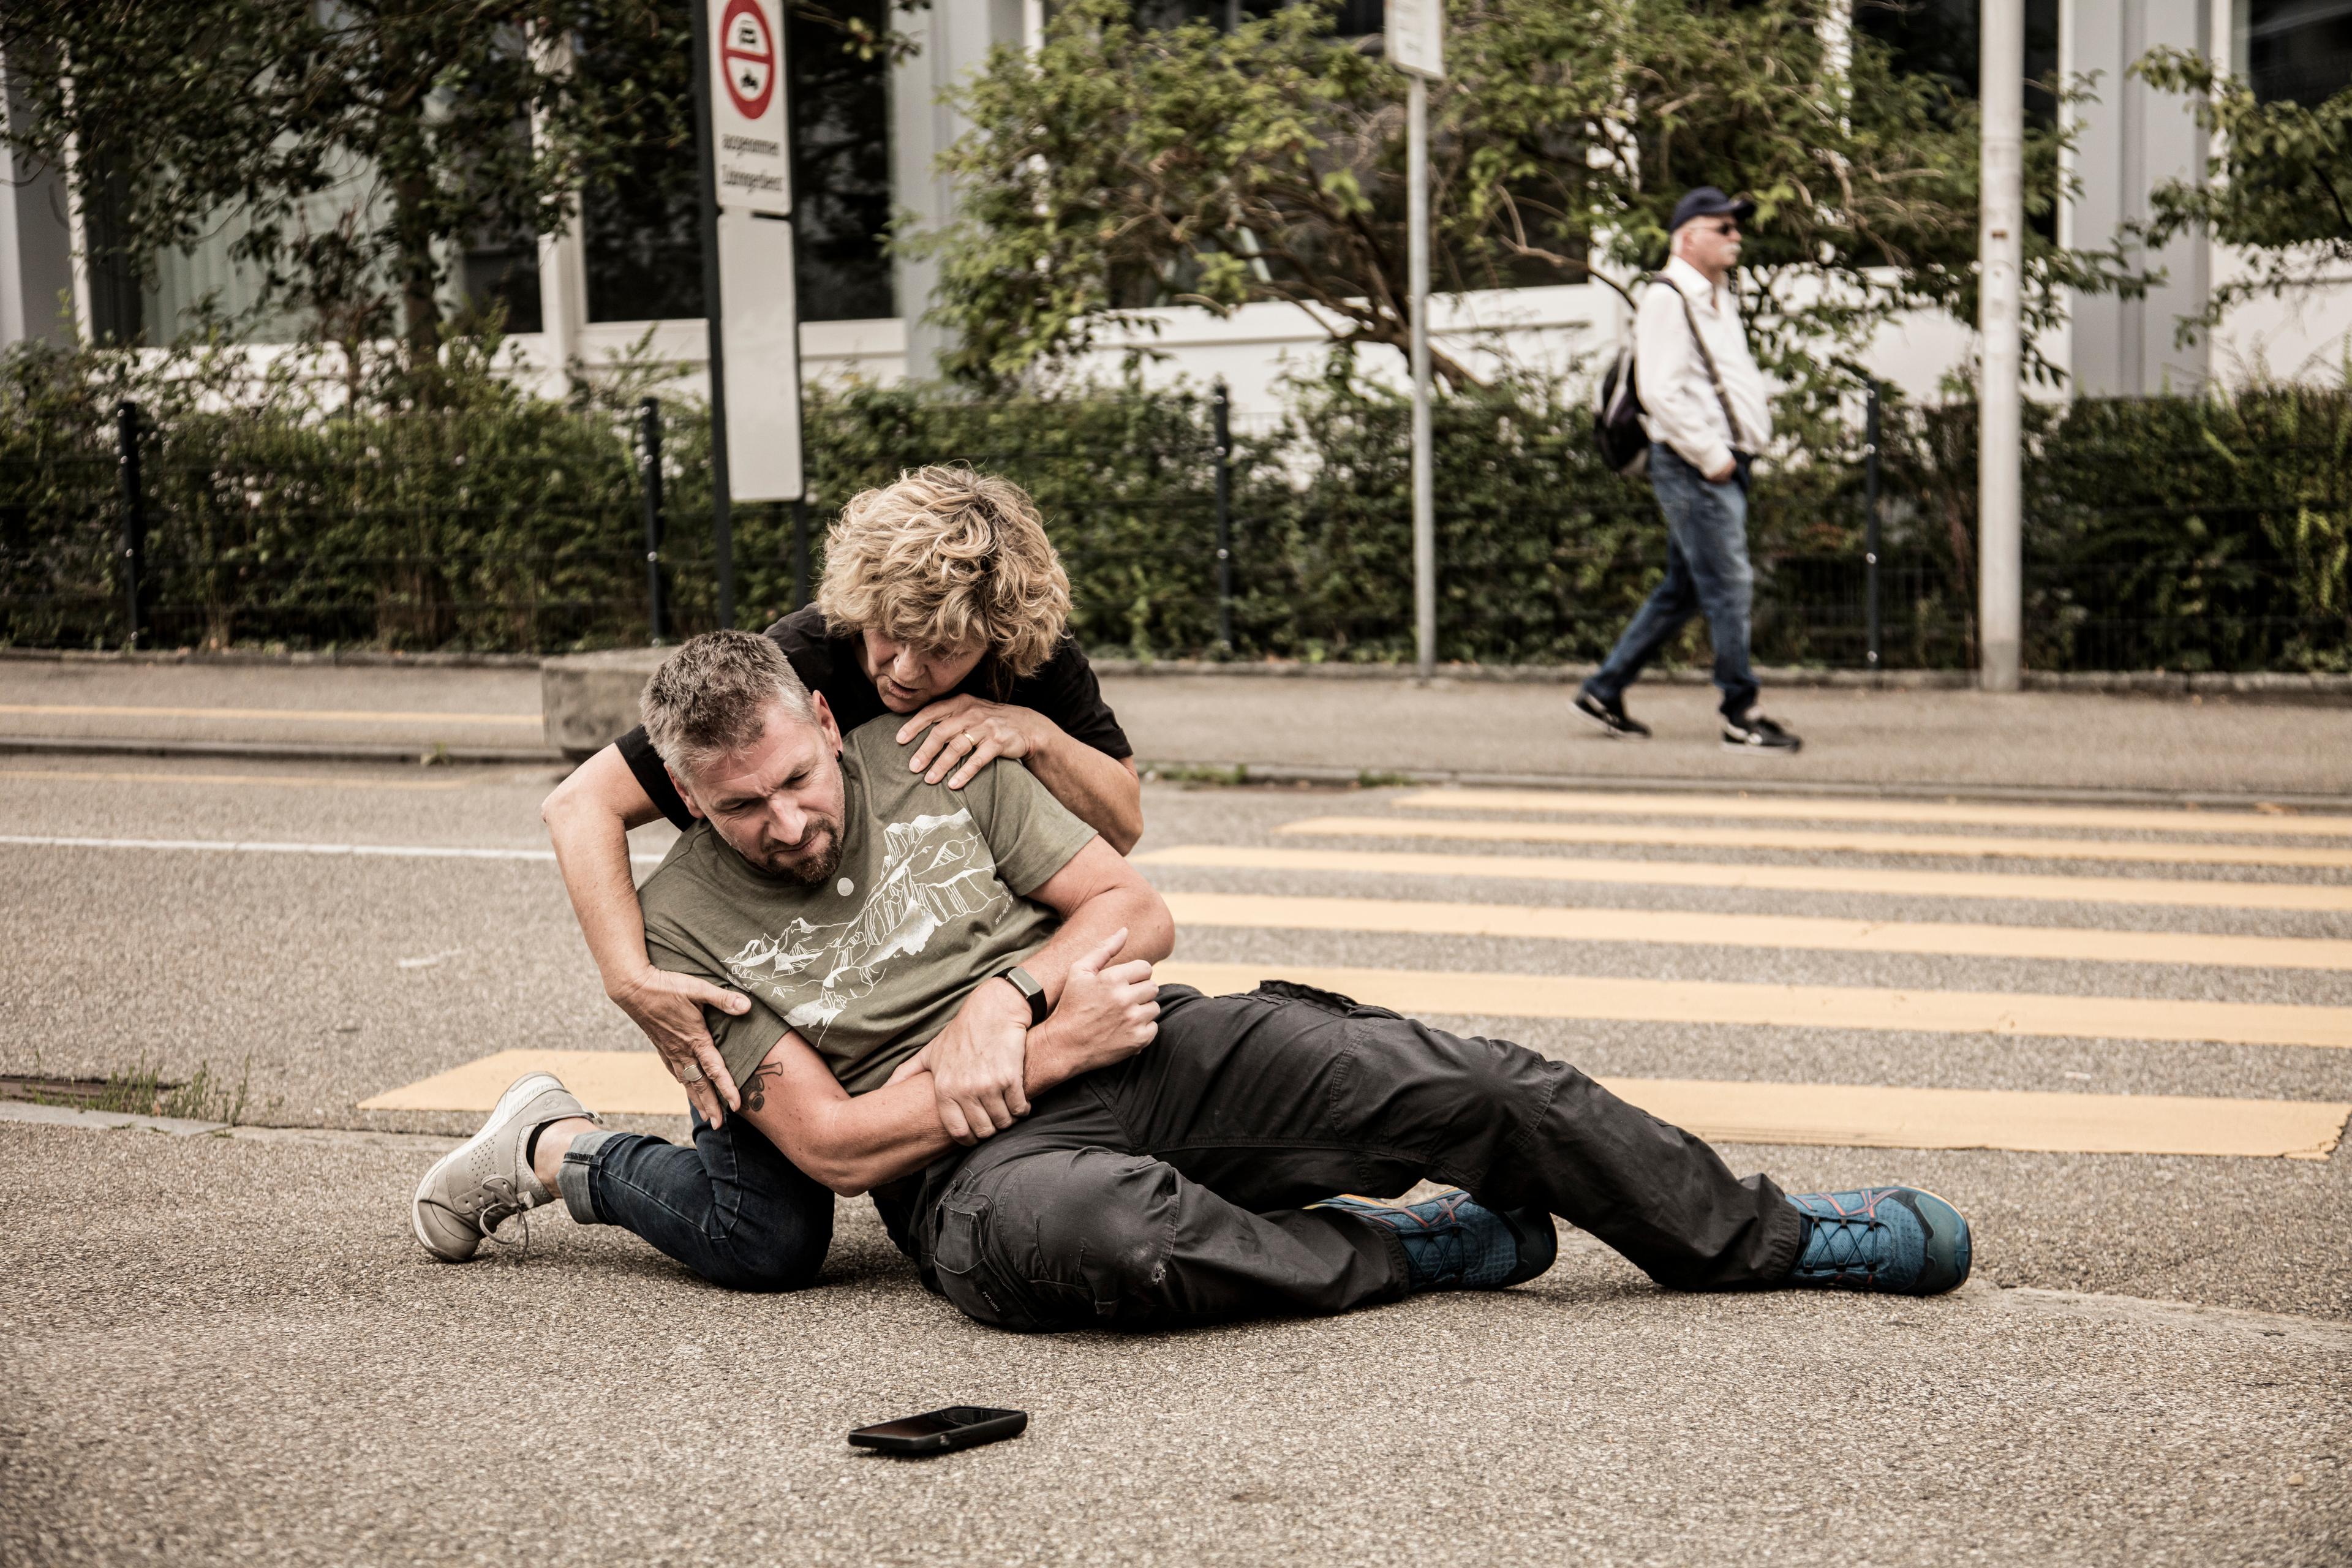 A man has tripped and is lying injured on the ground. A passerby takes care of him and provides first aid. 